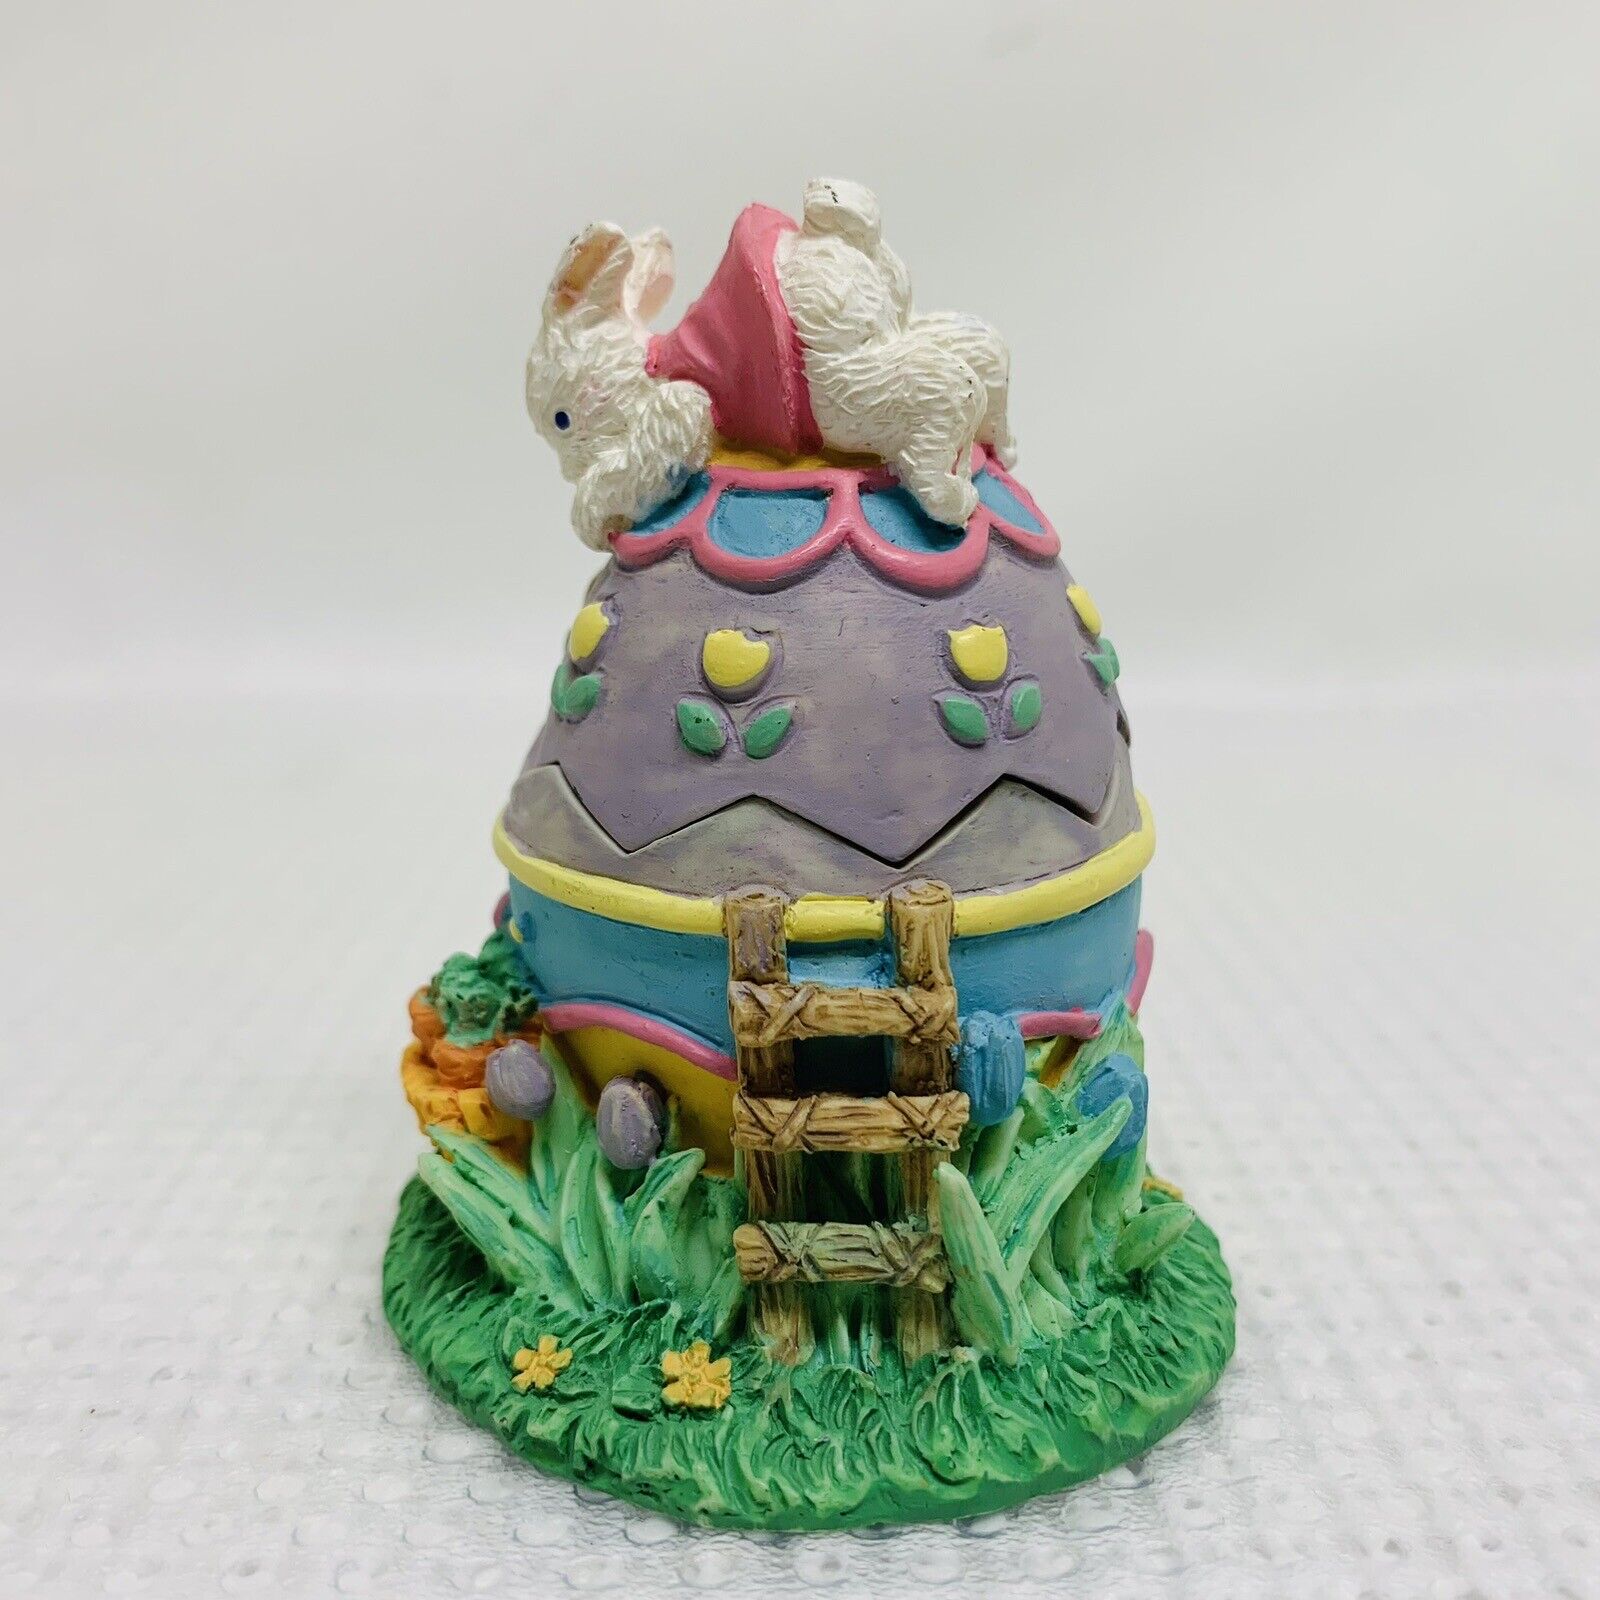 Vintage Cottontale Cottage Hand Painted Ceramic Easter Egg House